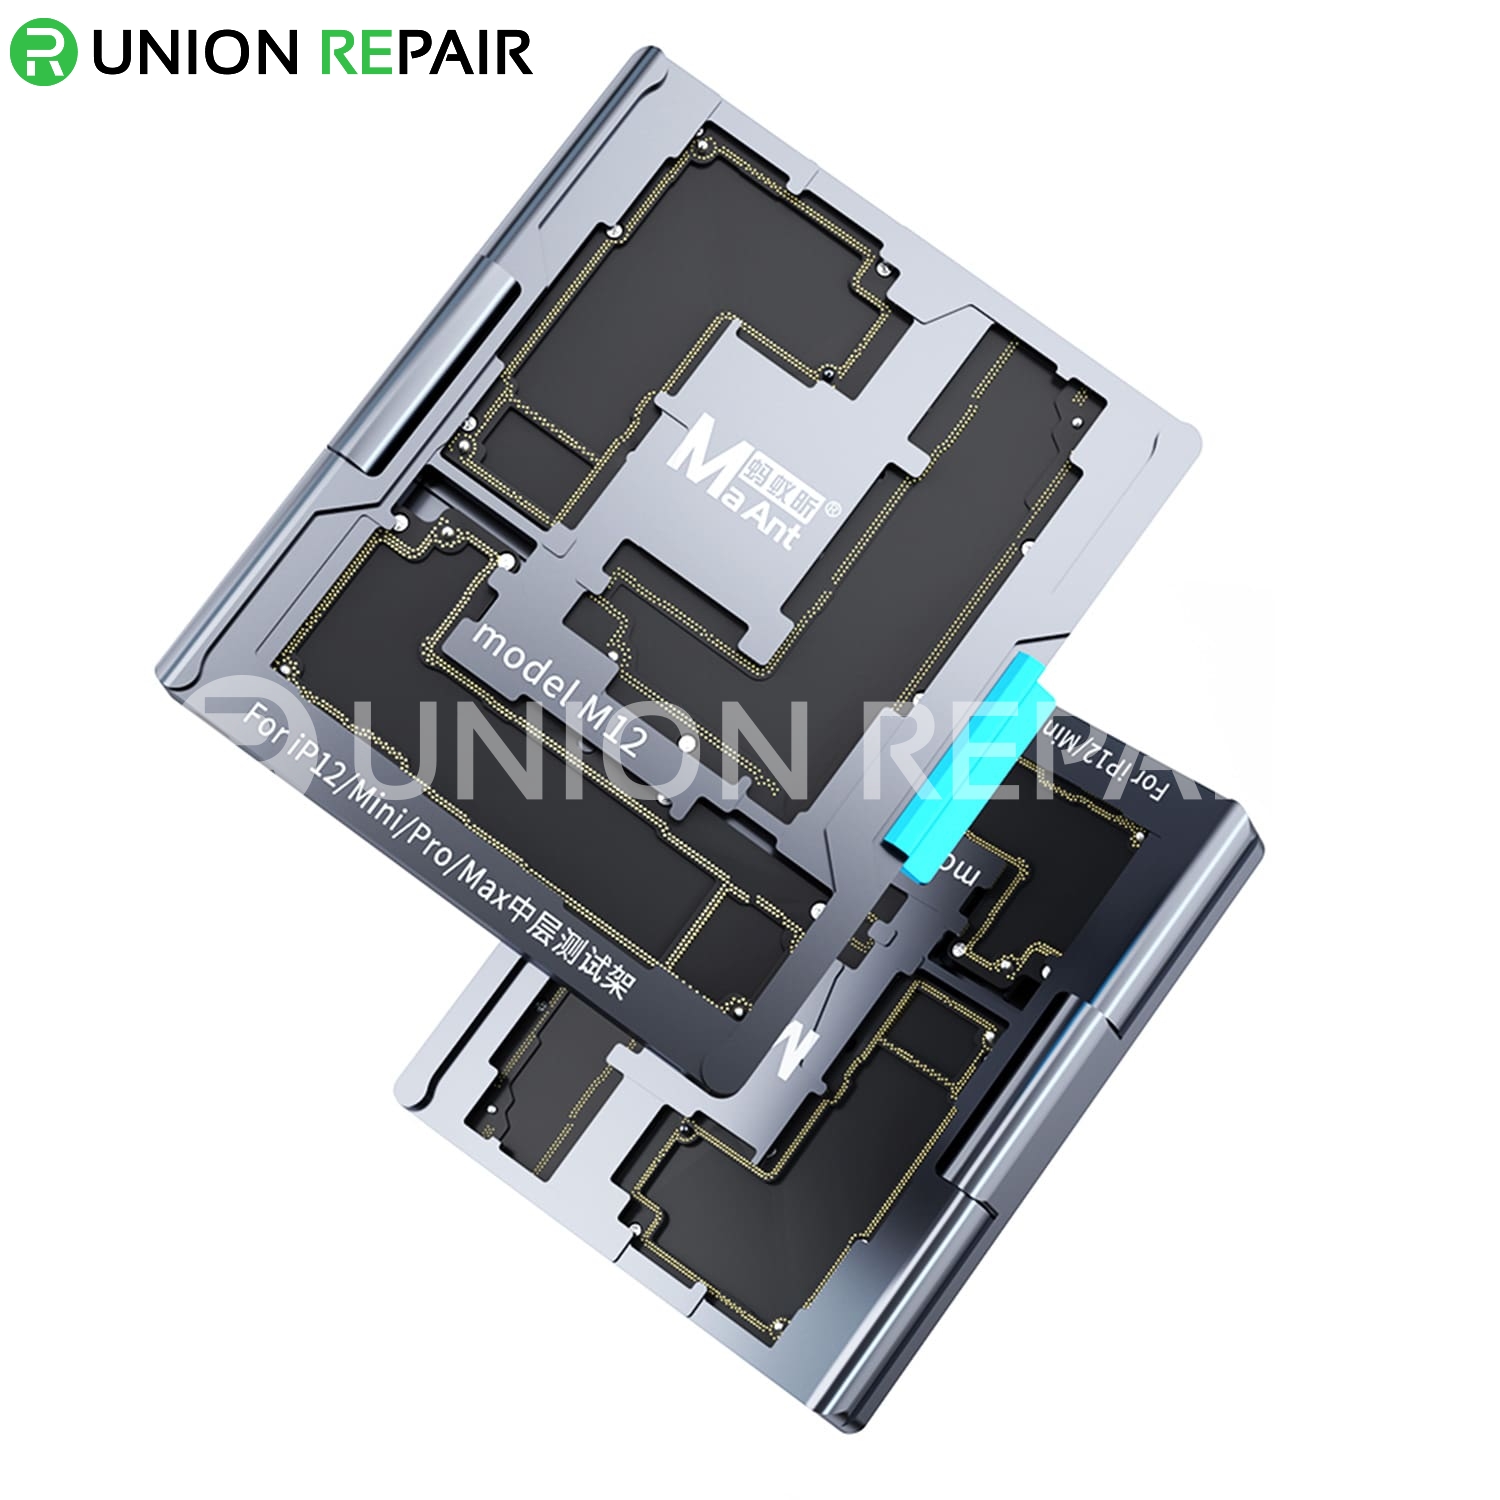 MaAnt Motherboard Layered Test Fixture for iPHone X-13ProMax